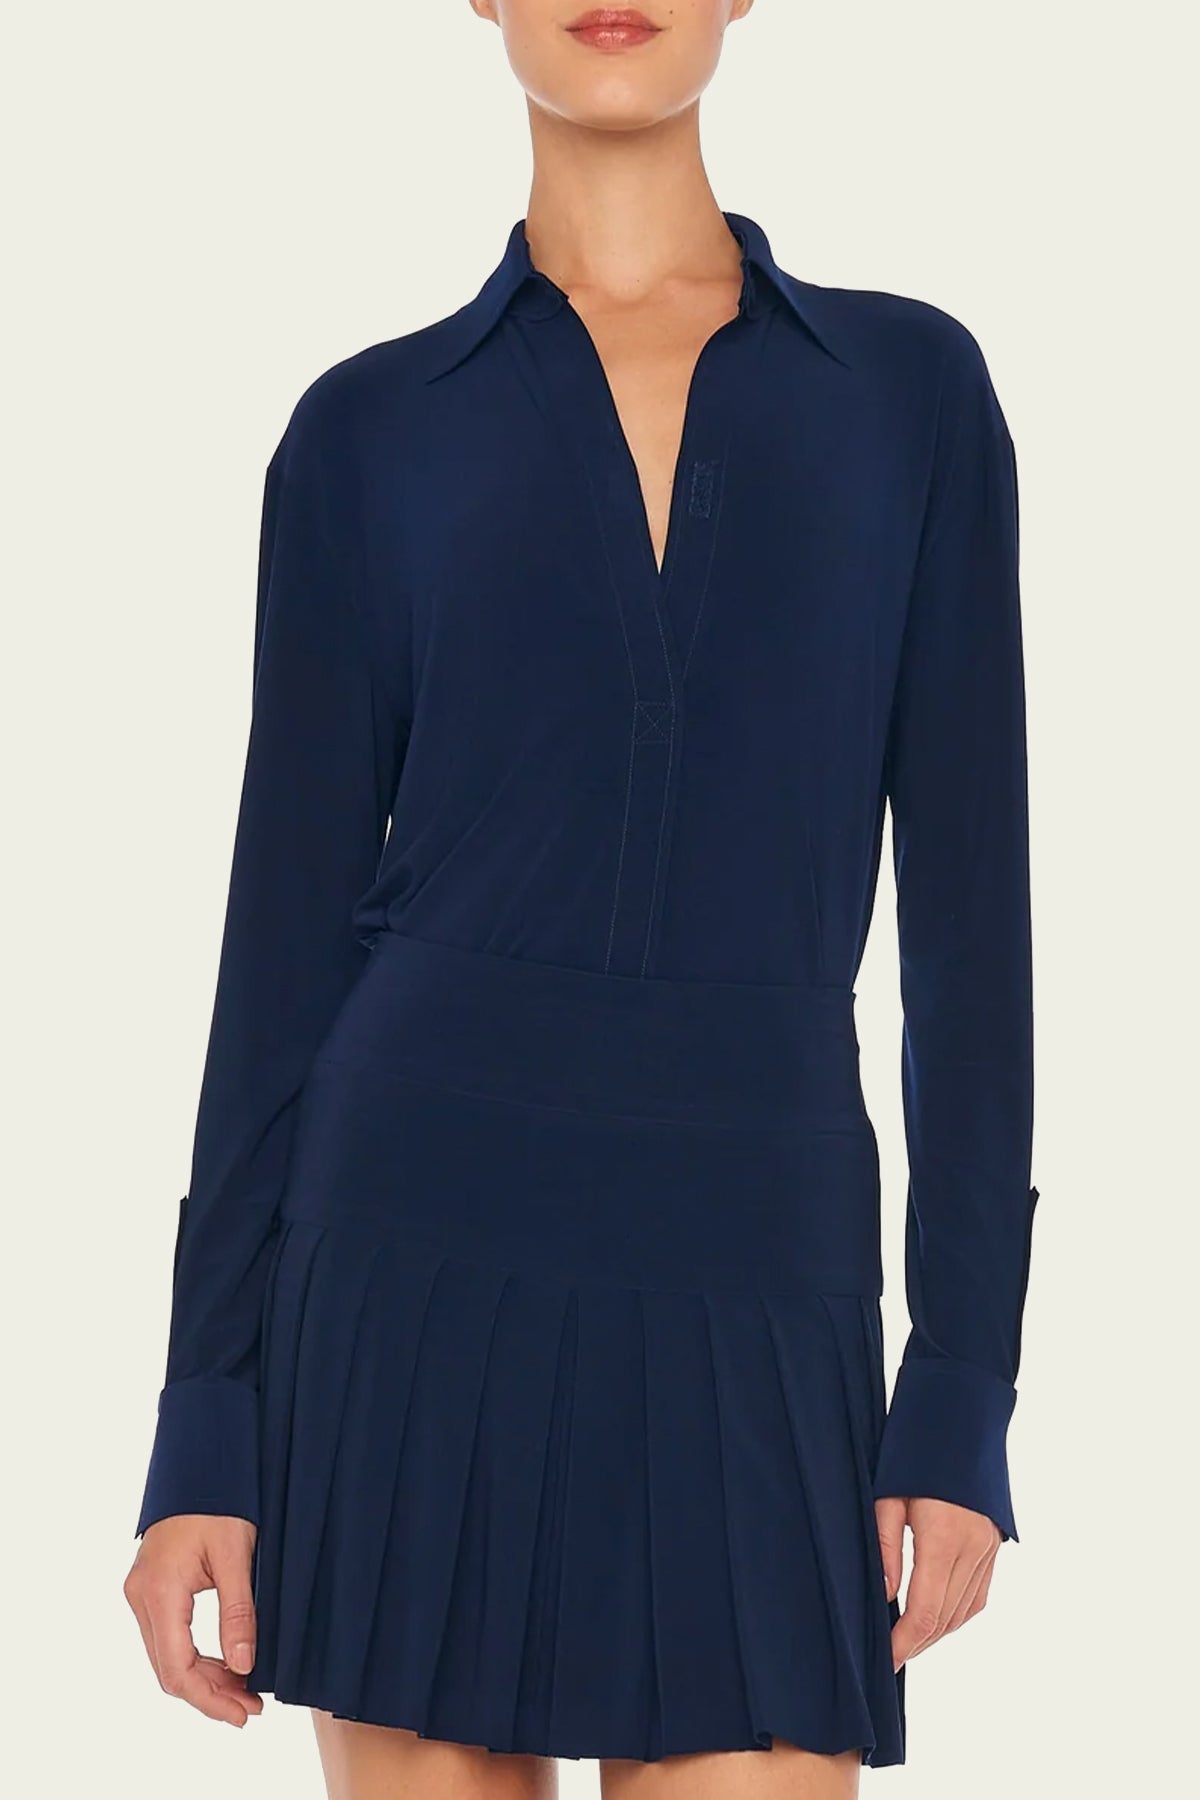 NK Shirt with Collar Stand in True Navy - shop-olivia.com